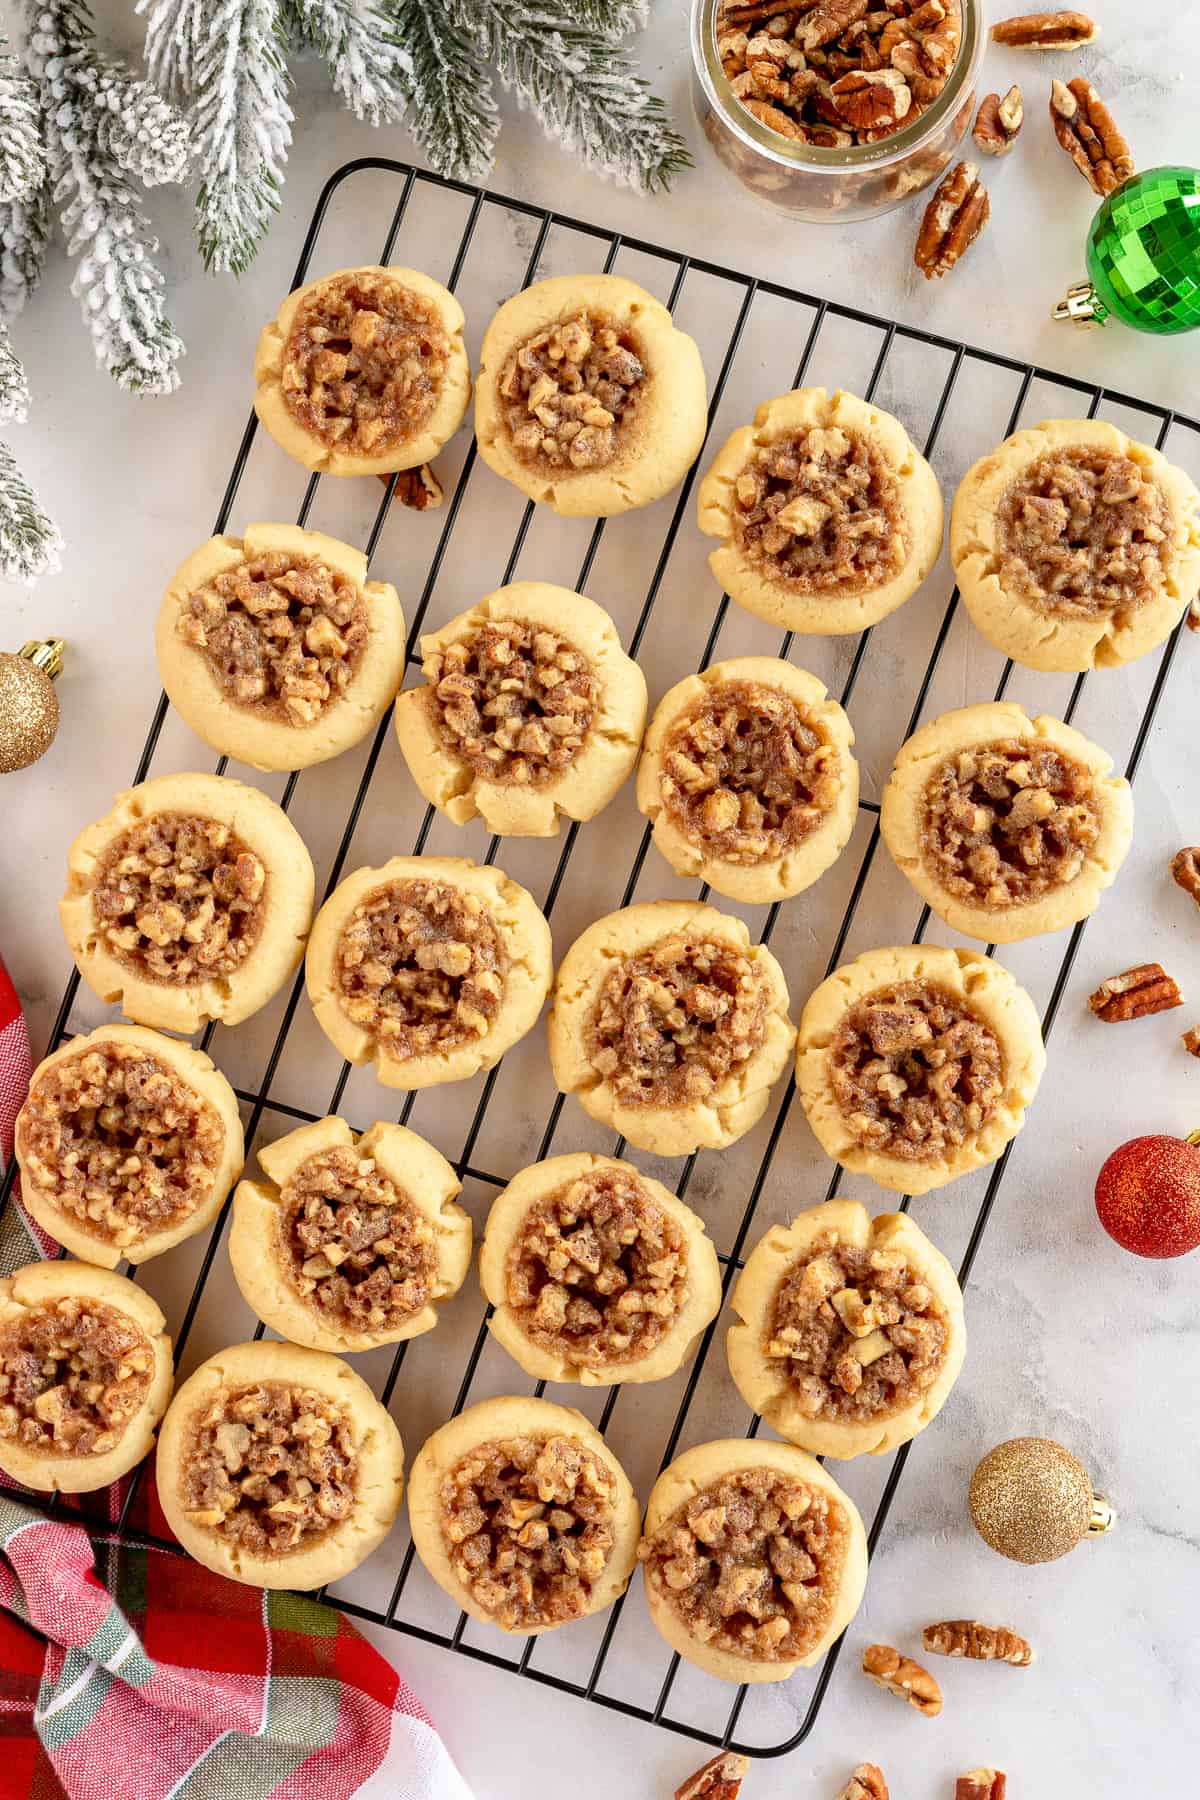 Thumbprint cookies with a pecan mixture on a wire cooling rack with Christmas ornaments and pine tree branches around the edges.